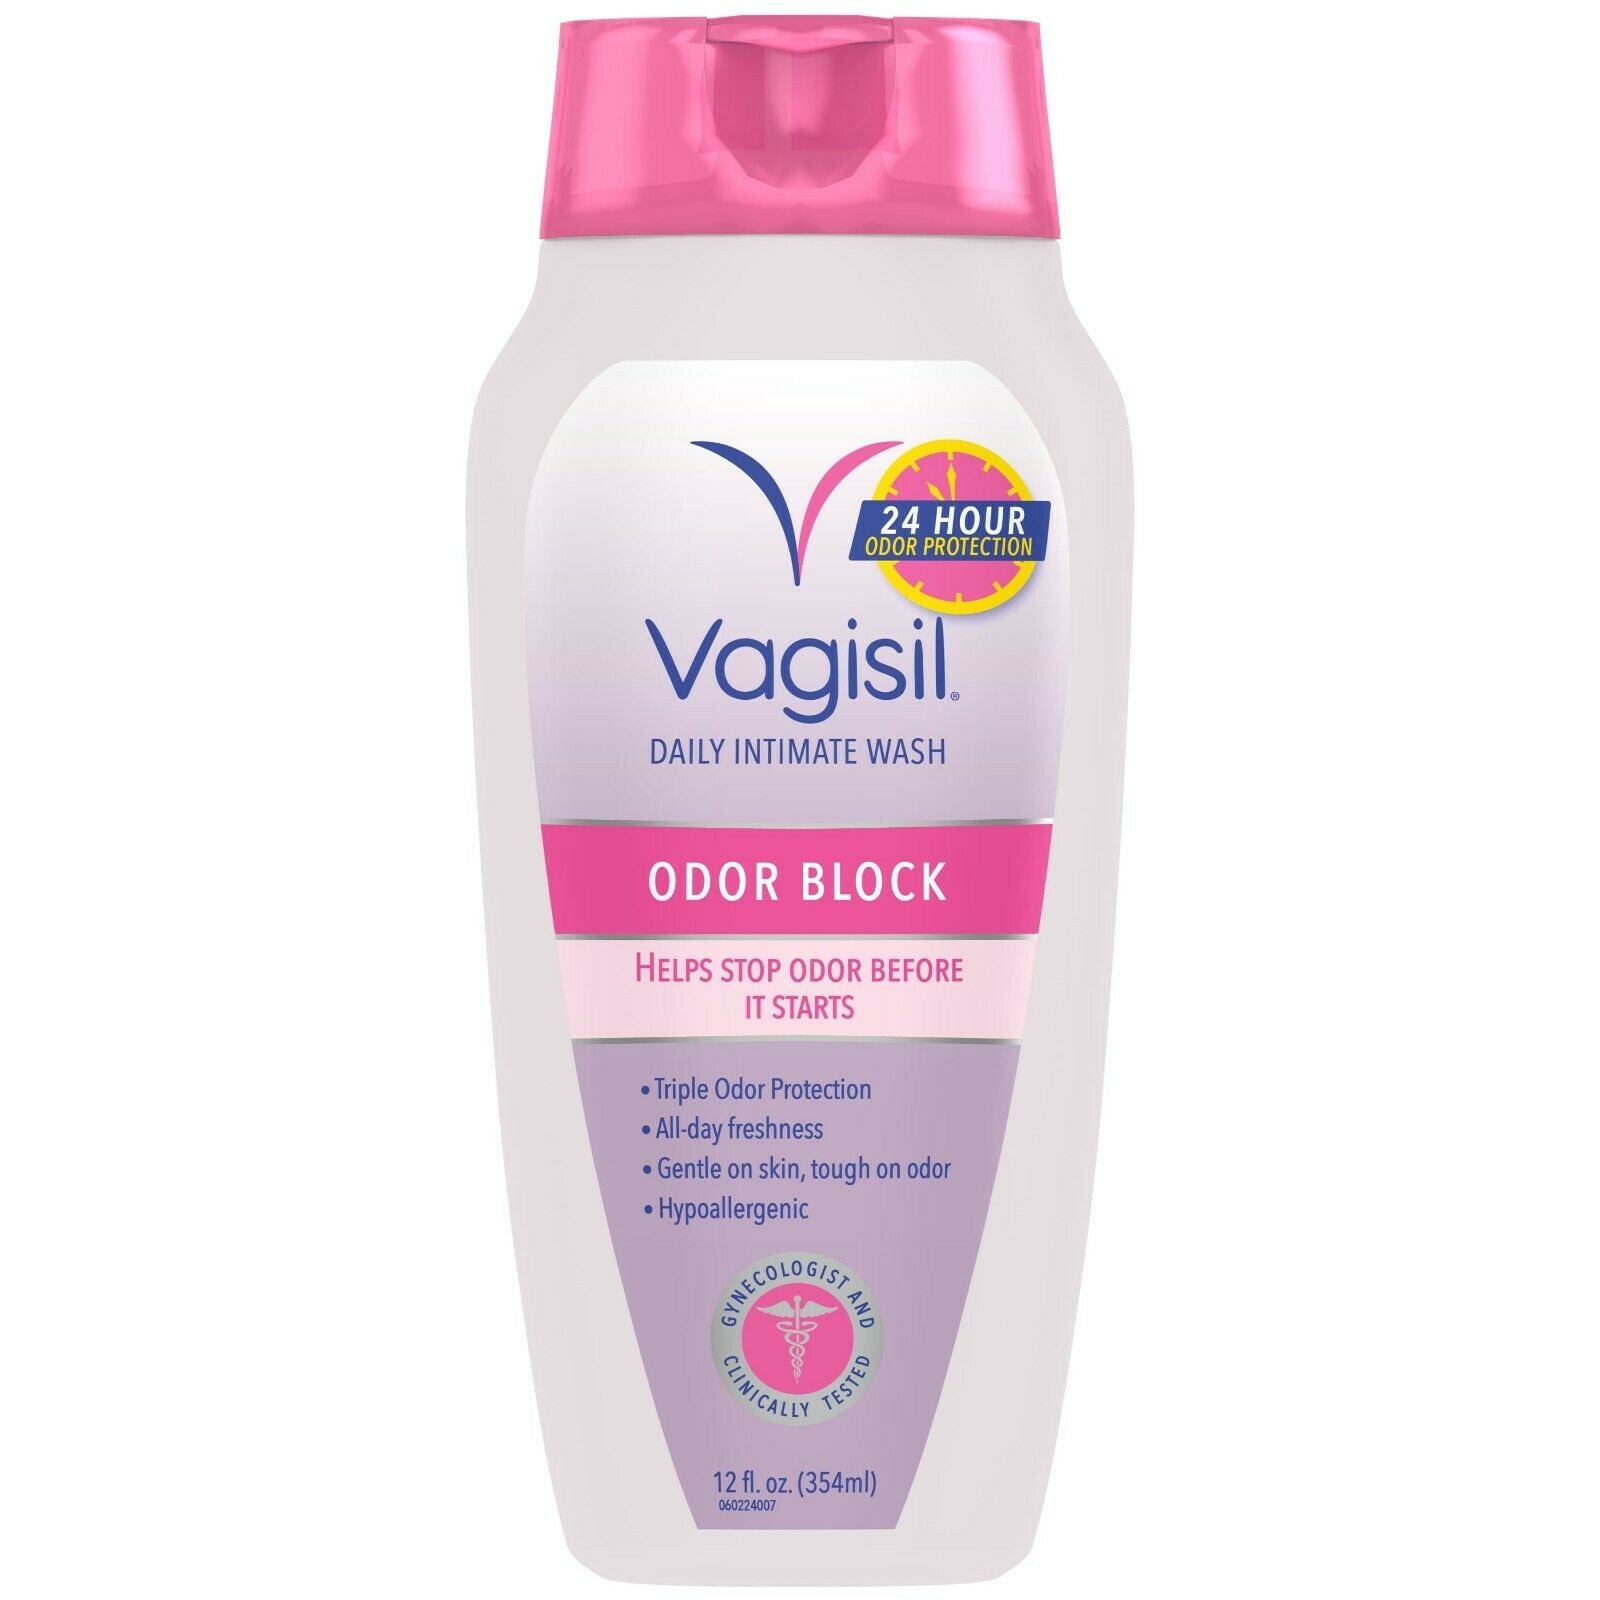 New Vagisil Odor Block Intimate Vaginal Wash For 24 Hour Odor Protection 12 Oz.